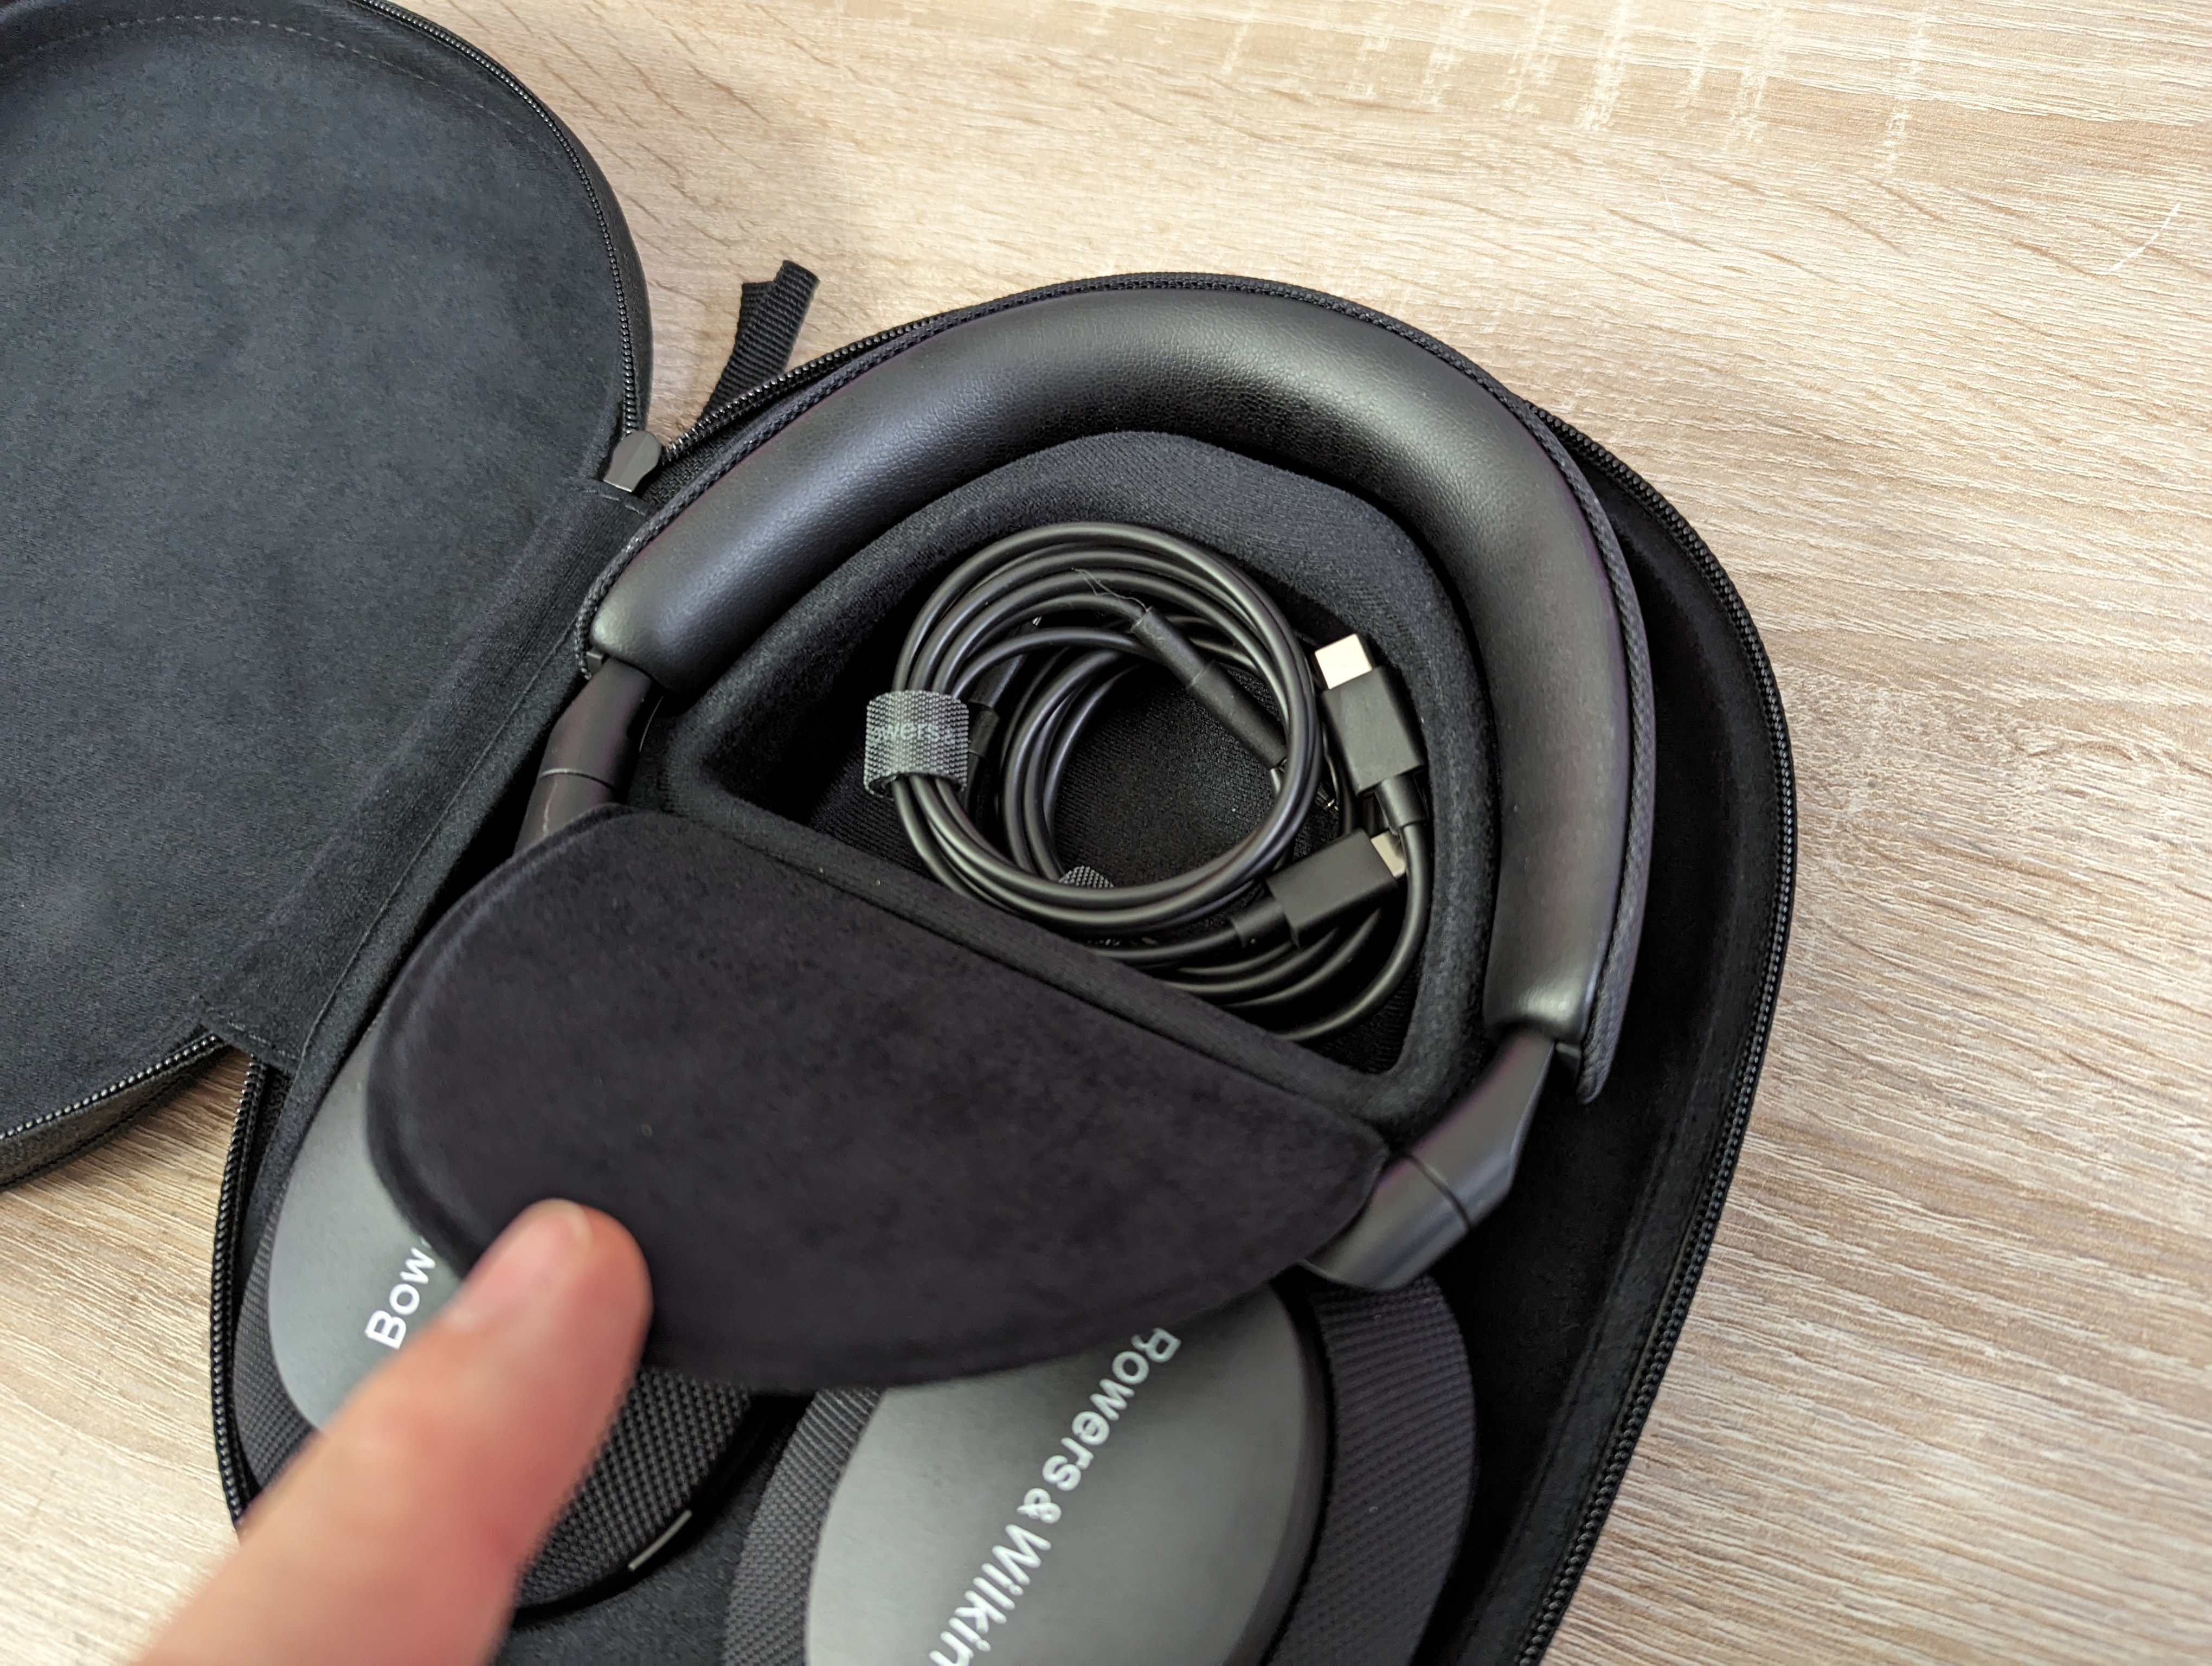 Compartment for accessories Bowers & Wilkins Px7 S2e.jpg